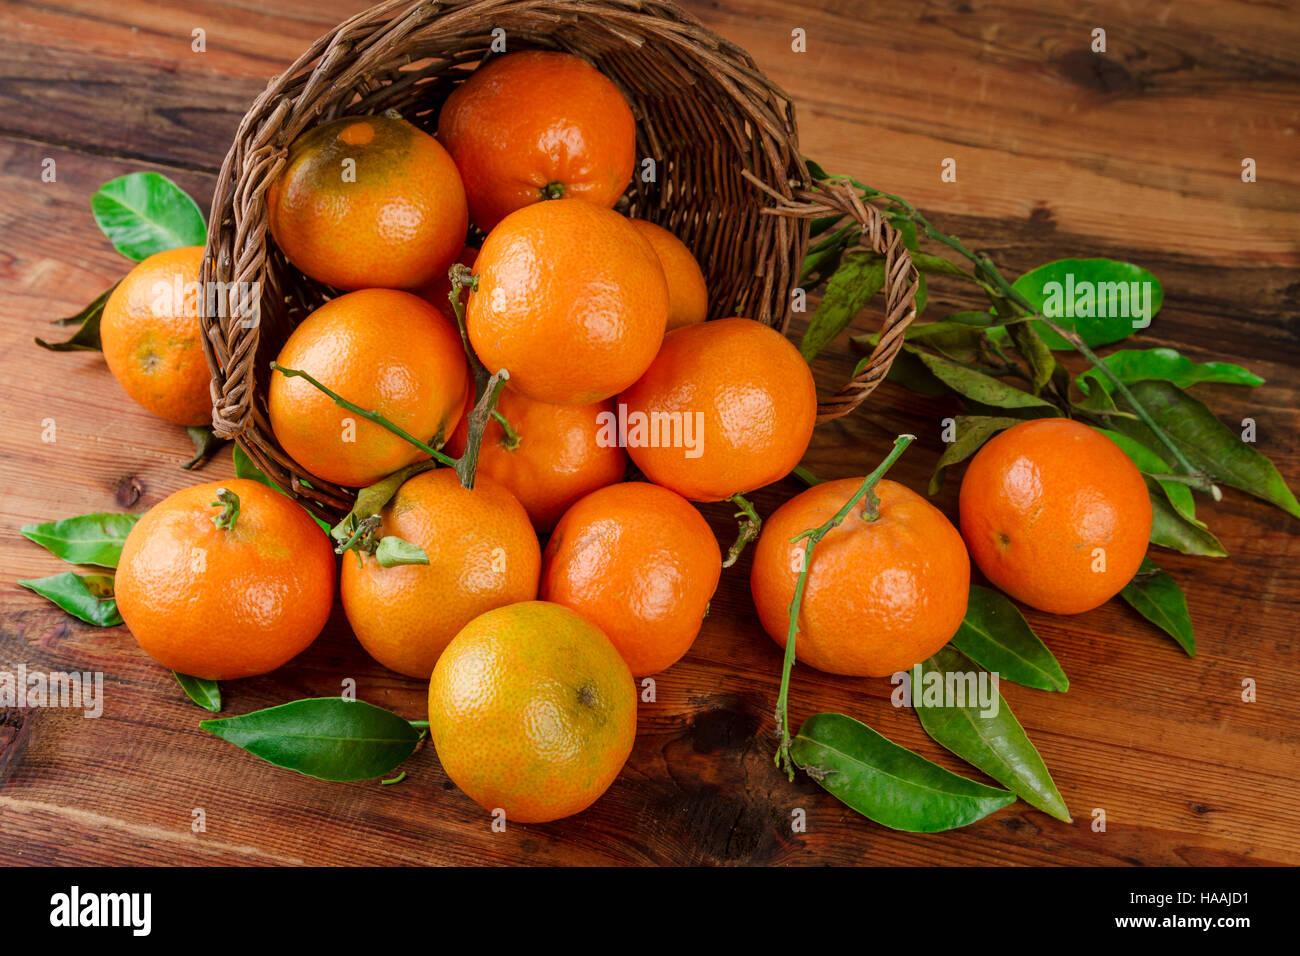 Tangerines basket scattered fruits on woden table Stock Photo